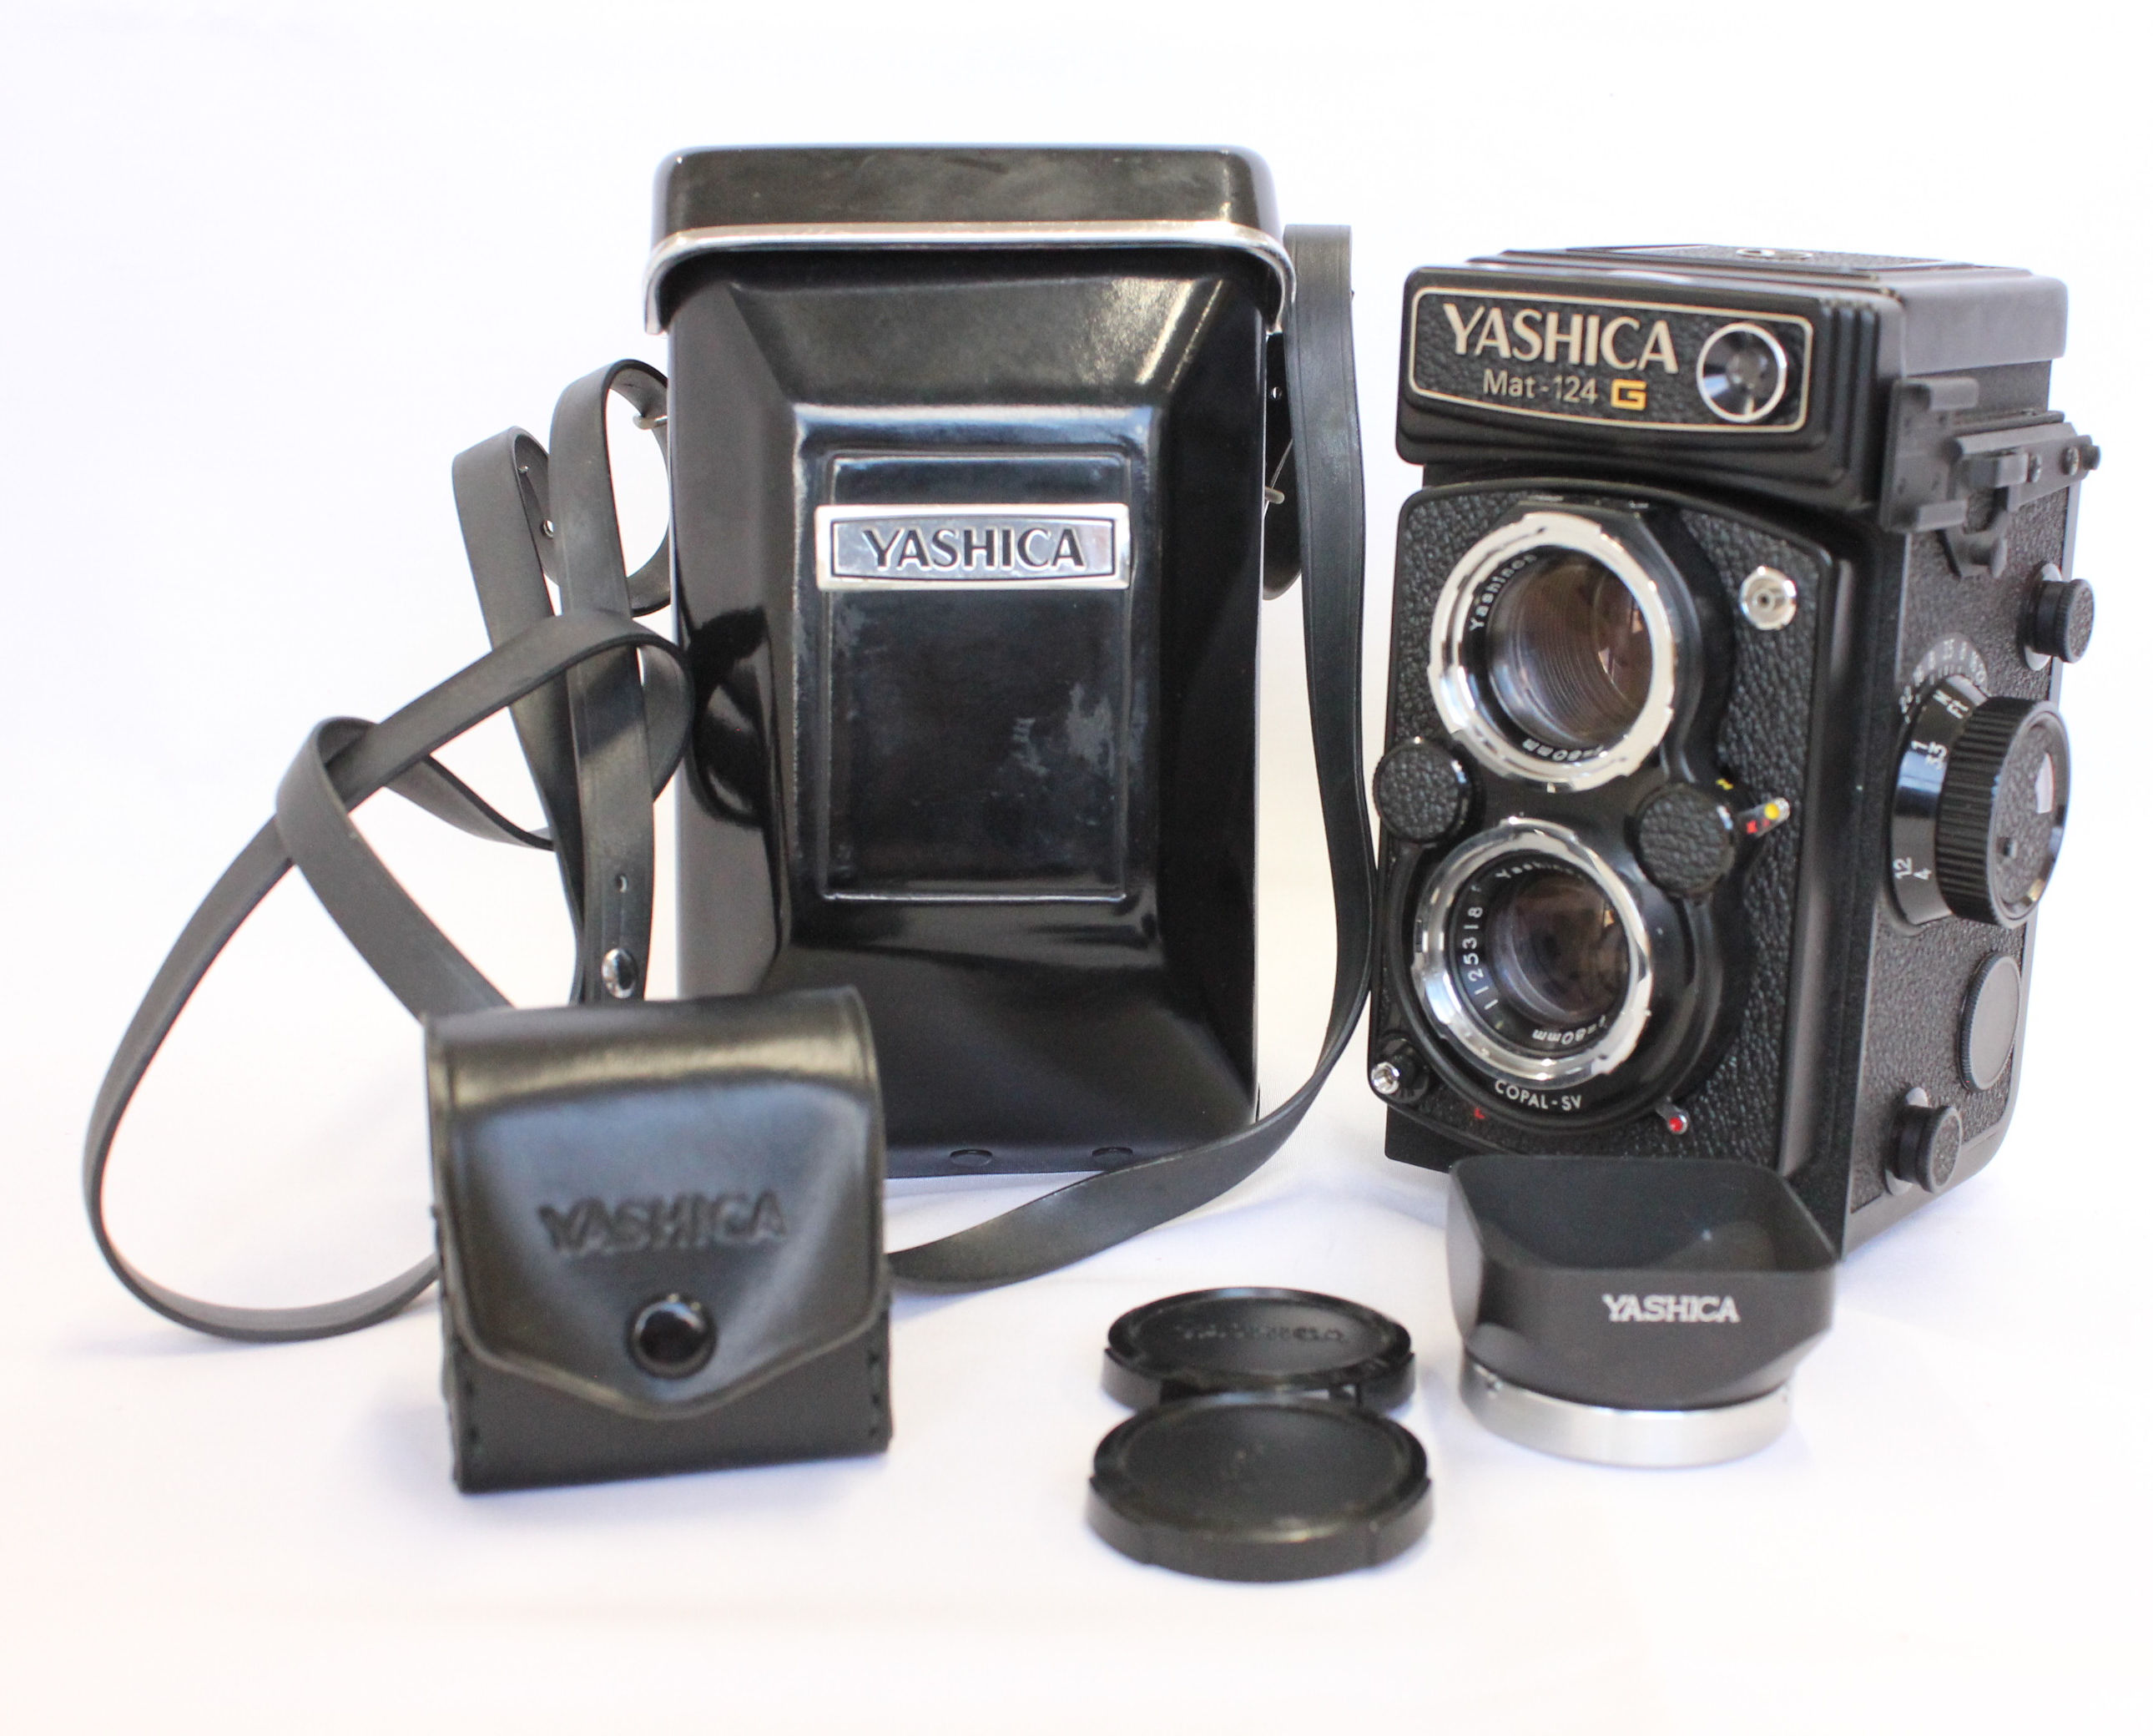  YASHICA MAT 124 G 6x6 TLR Medium Format Camera with 80mm F/3.5 Lens from Japan Photo 0